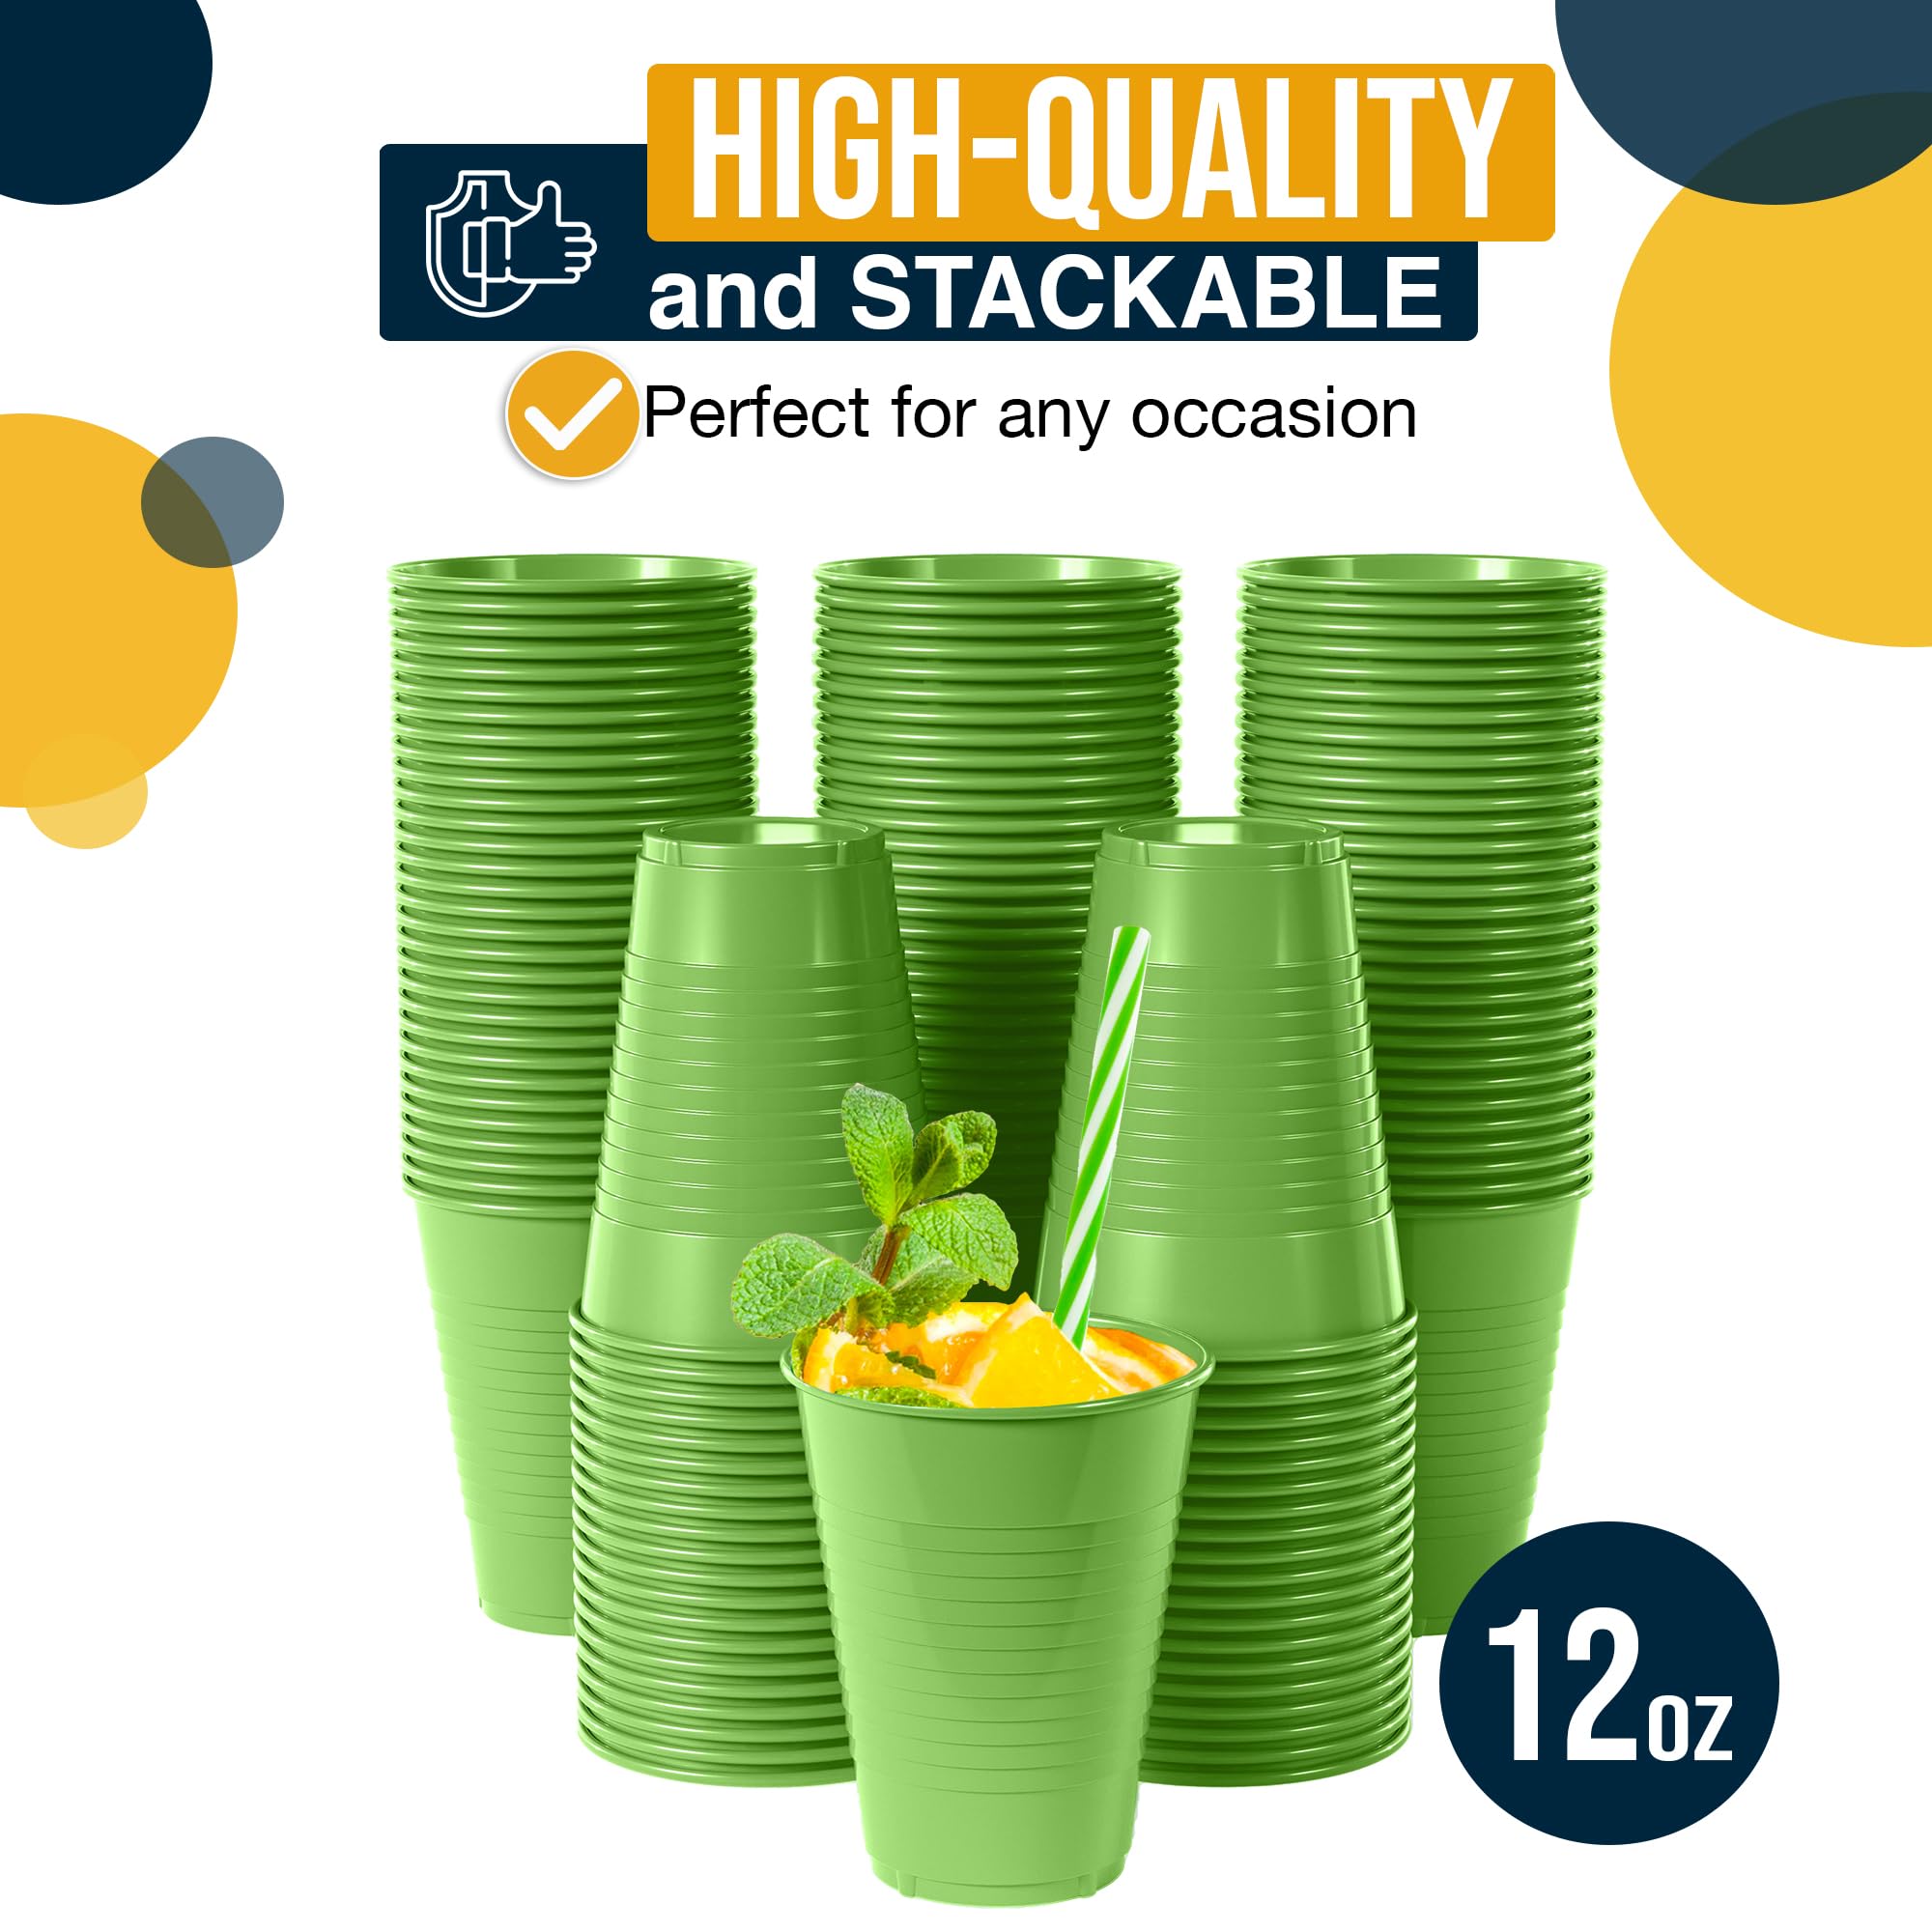 12 Oz. Lime Green Plastic Cups | 50 Count